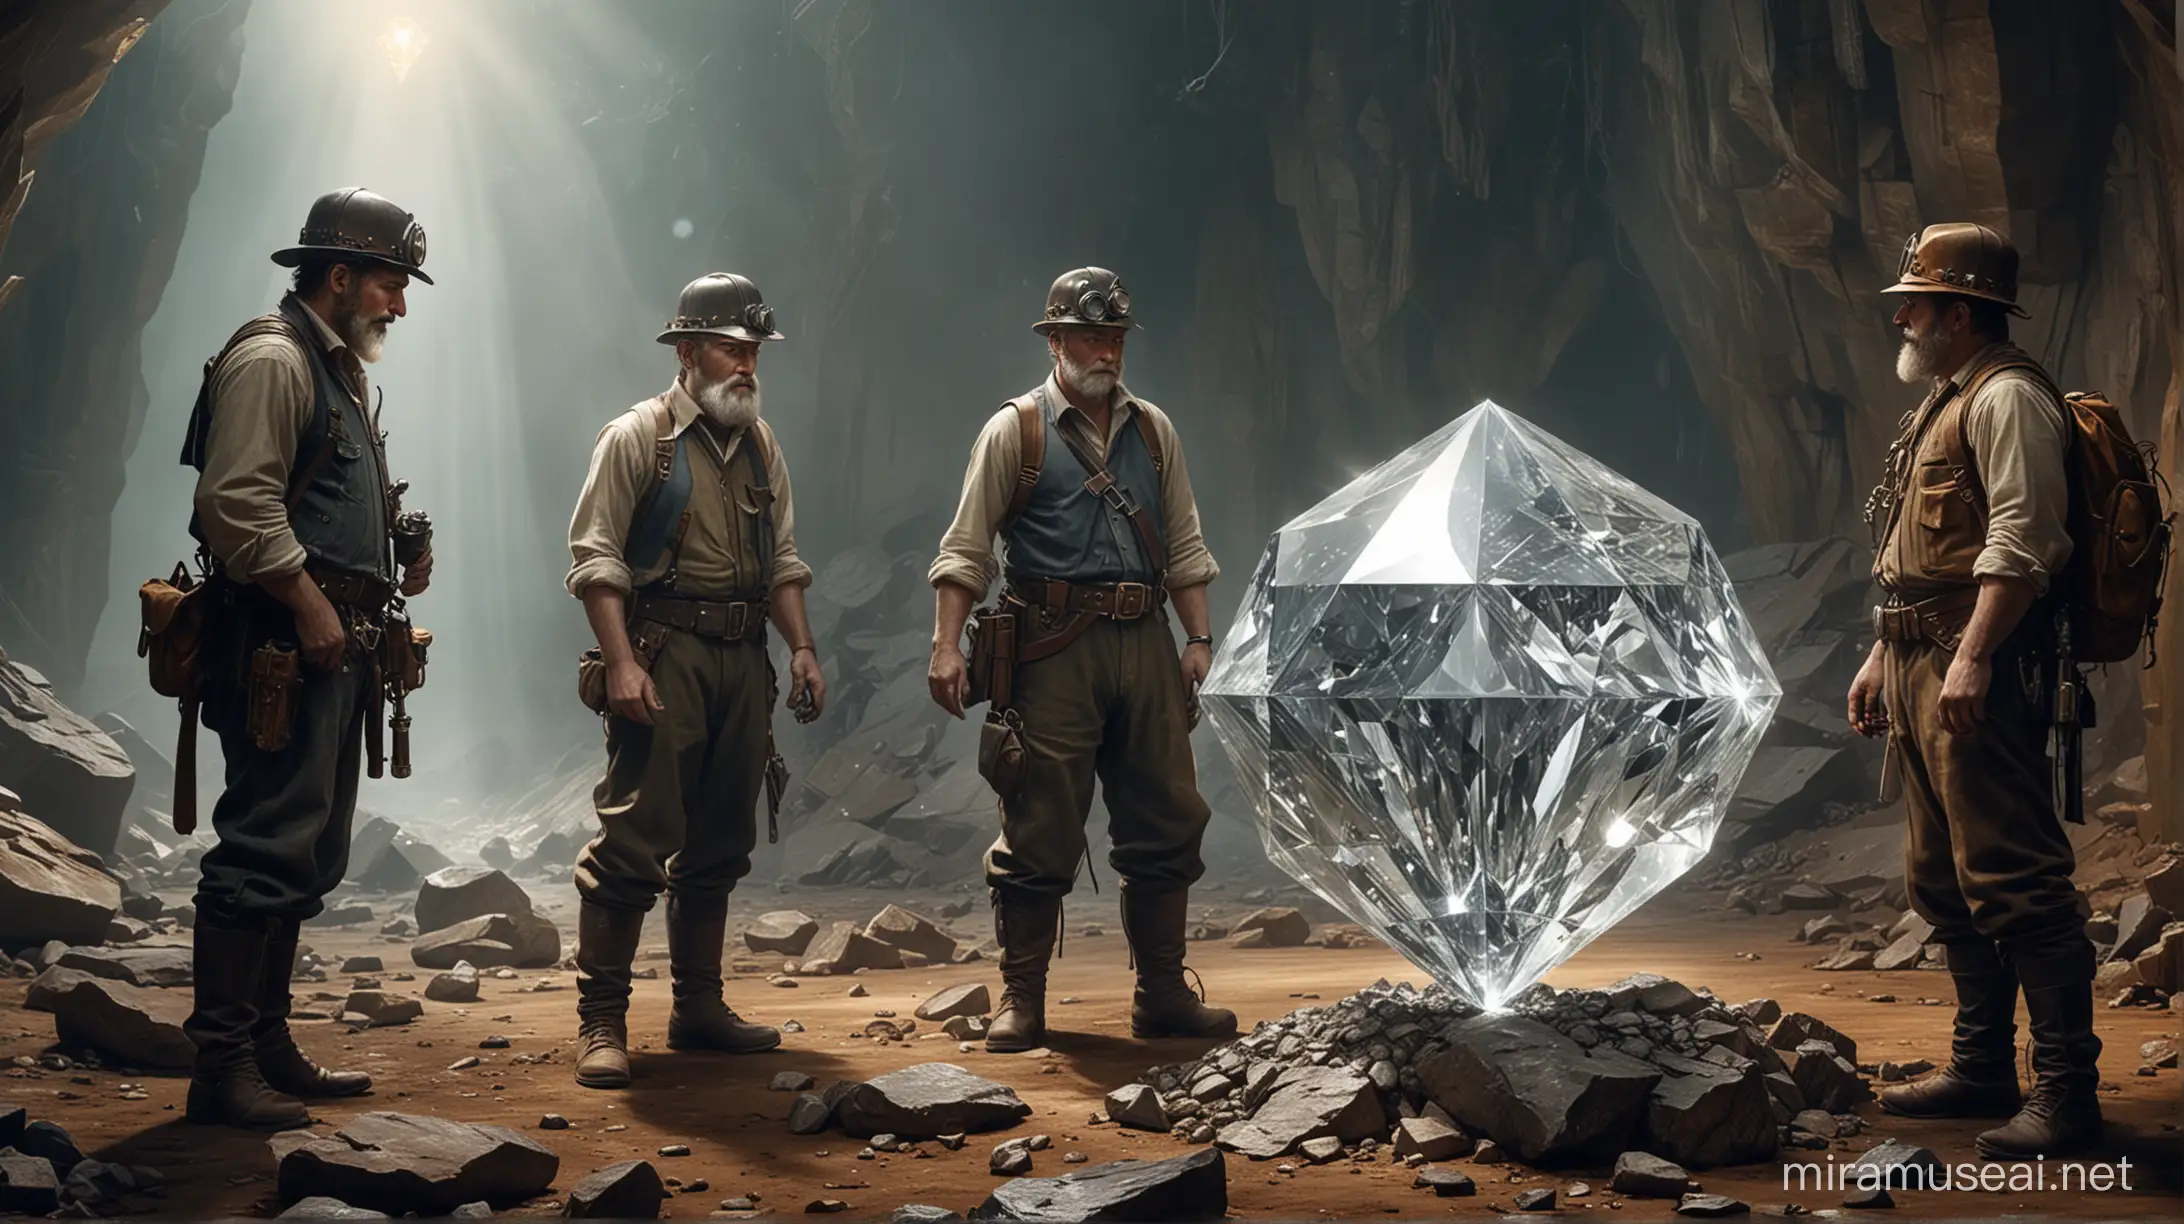 Steampunk Miners Discover Giant Shining Diamond in Underground Mine